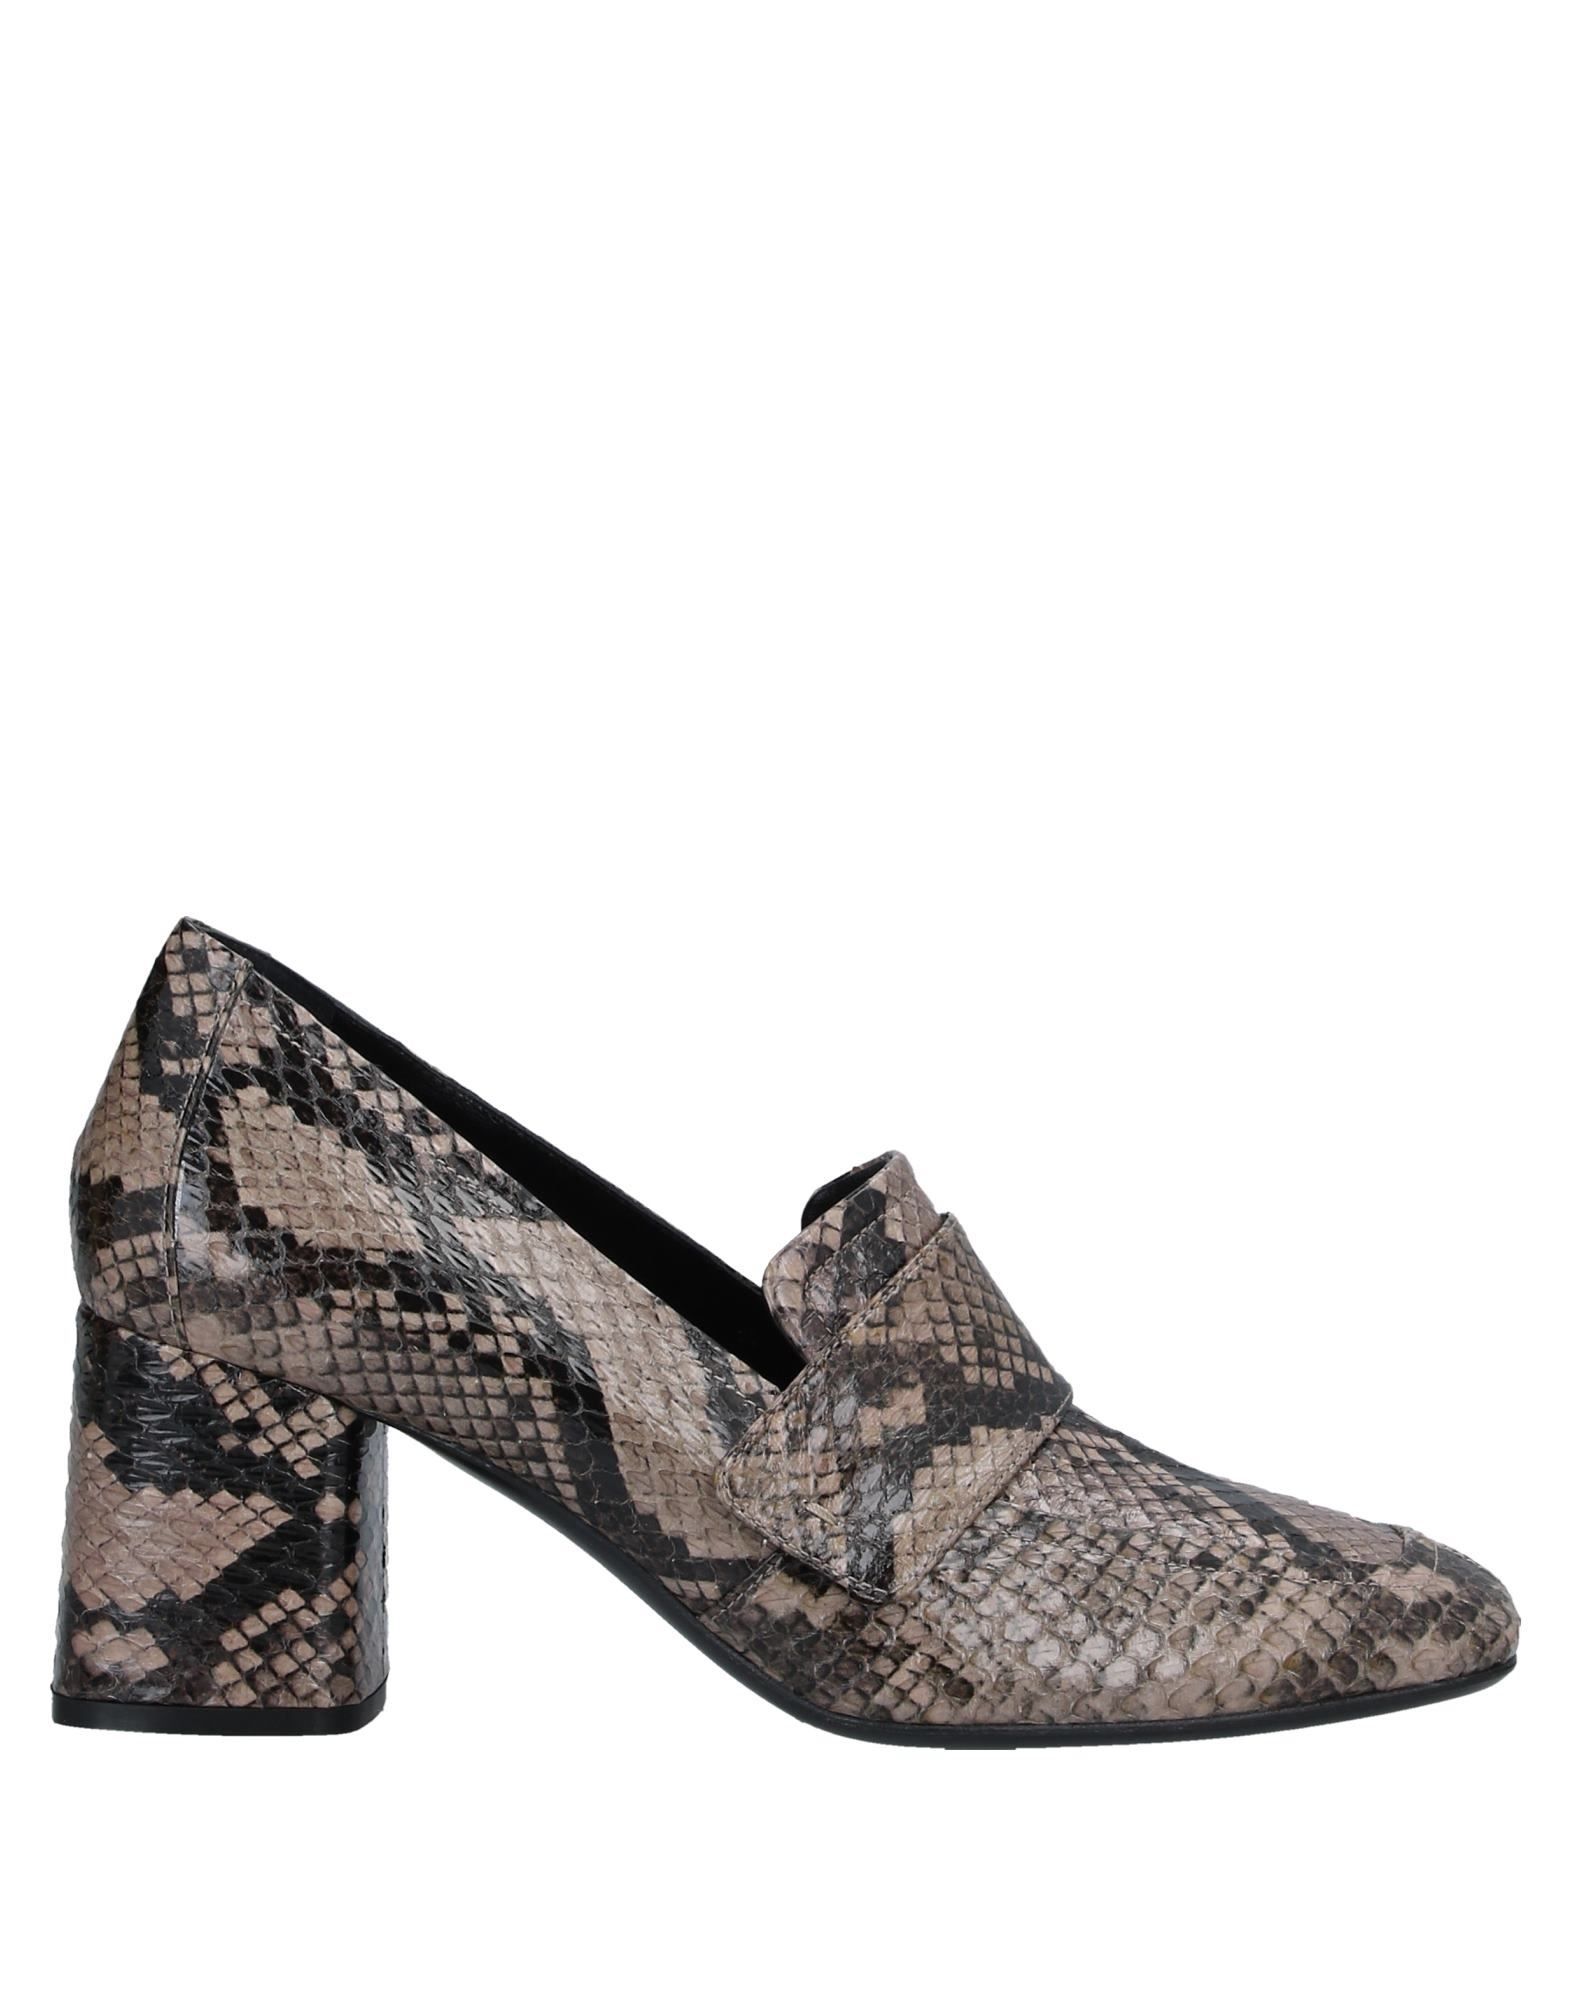 snakeskin print, no appliqués, multicolour pattern, square toeline, square heel, leather lining, leather sole, contains non-textile parts of animal origin